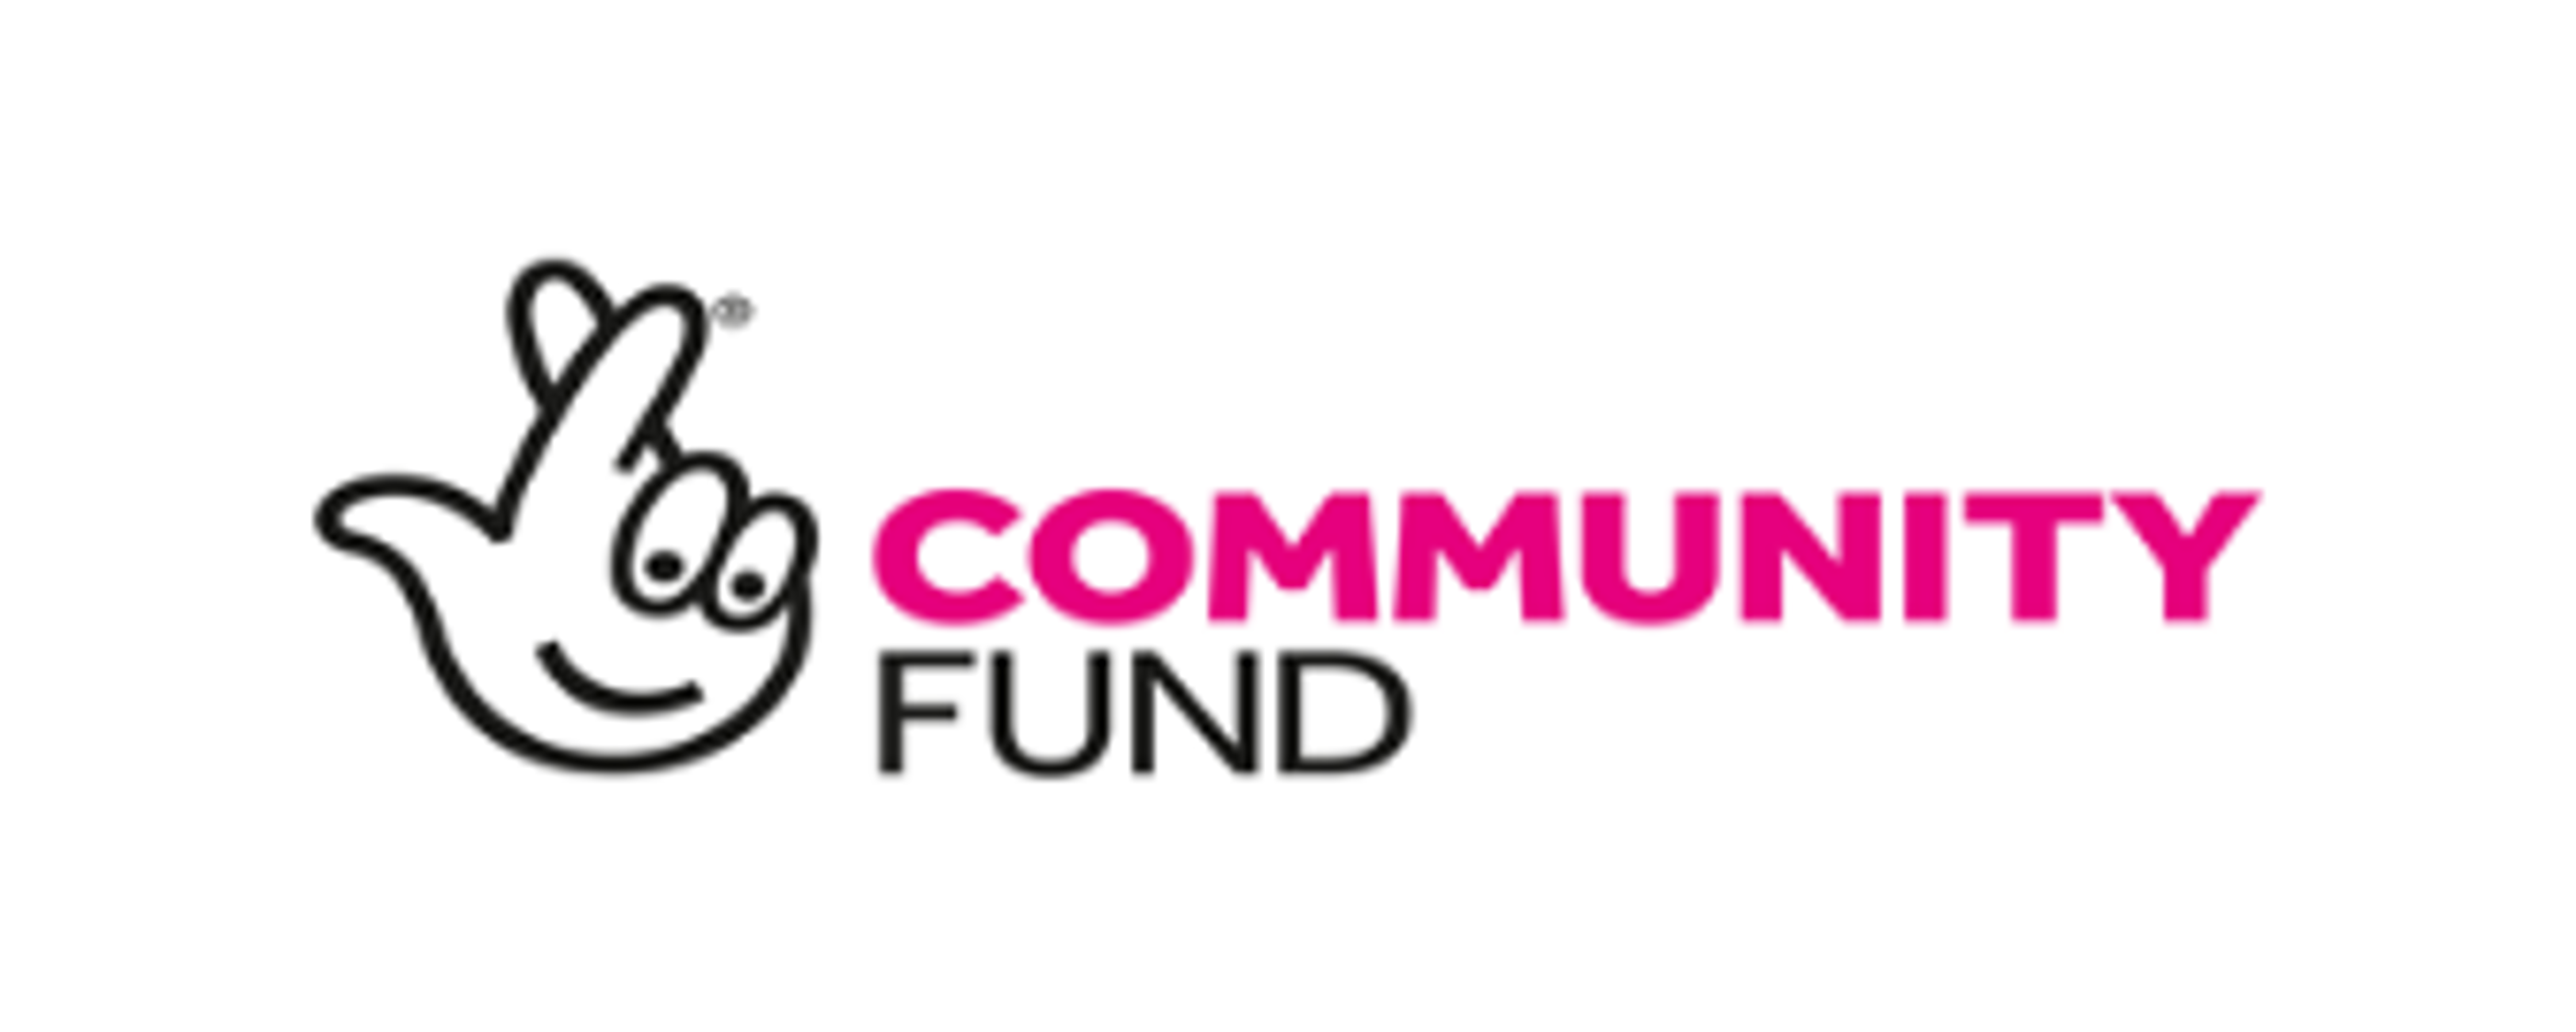 lottery community fund.png